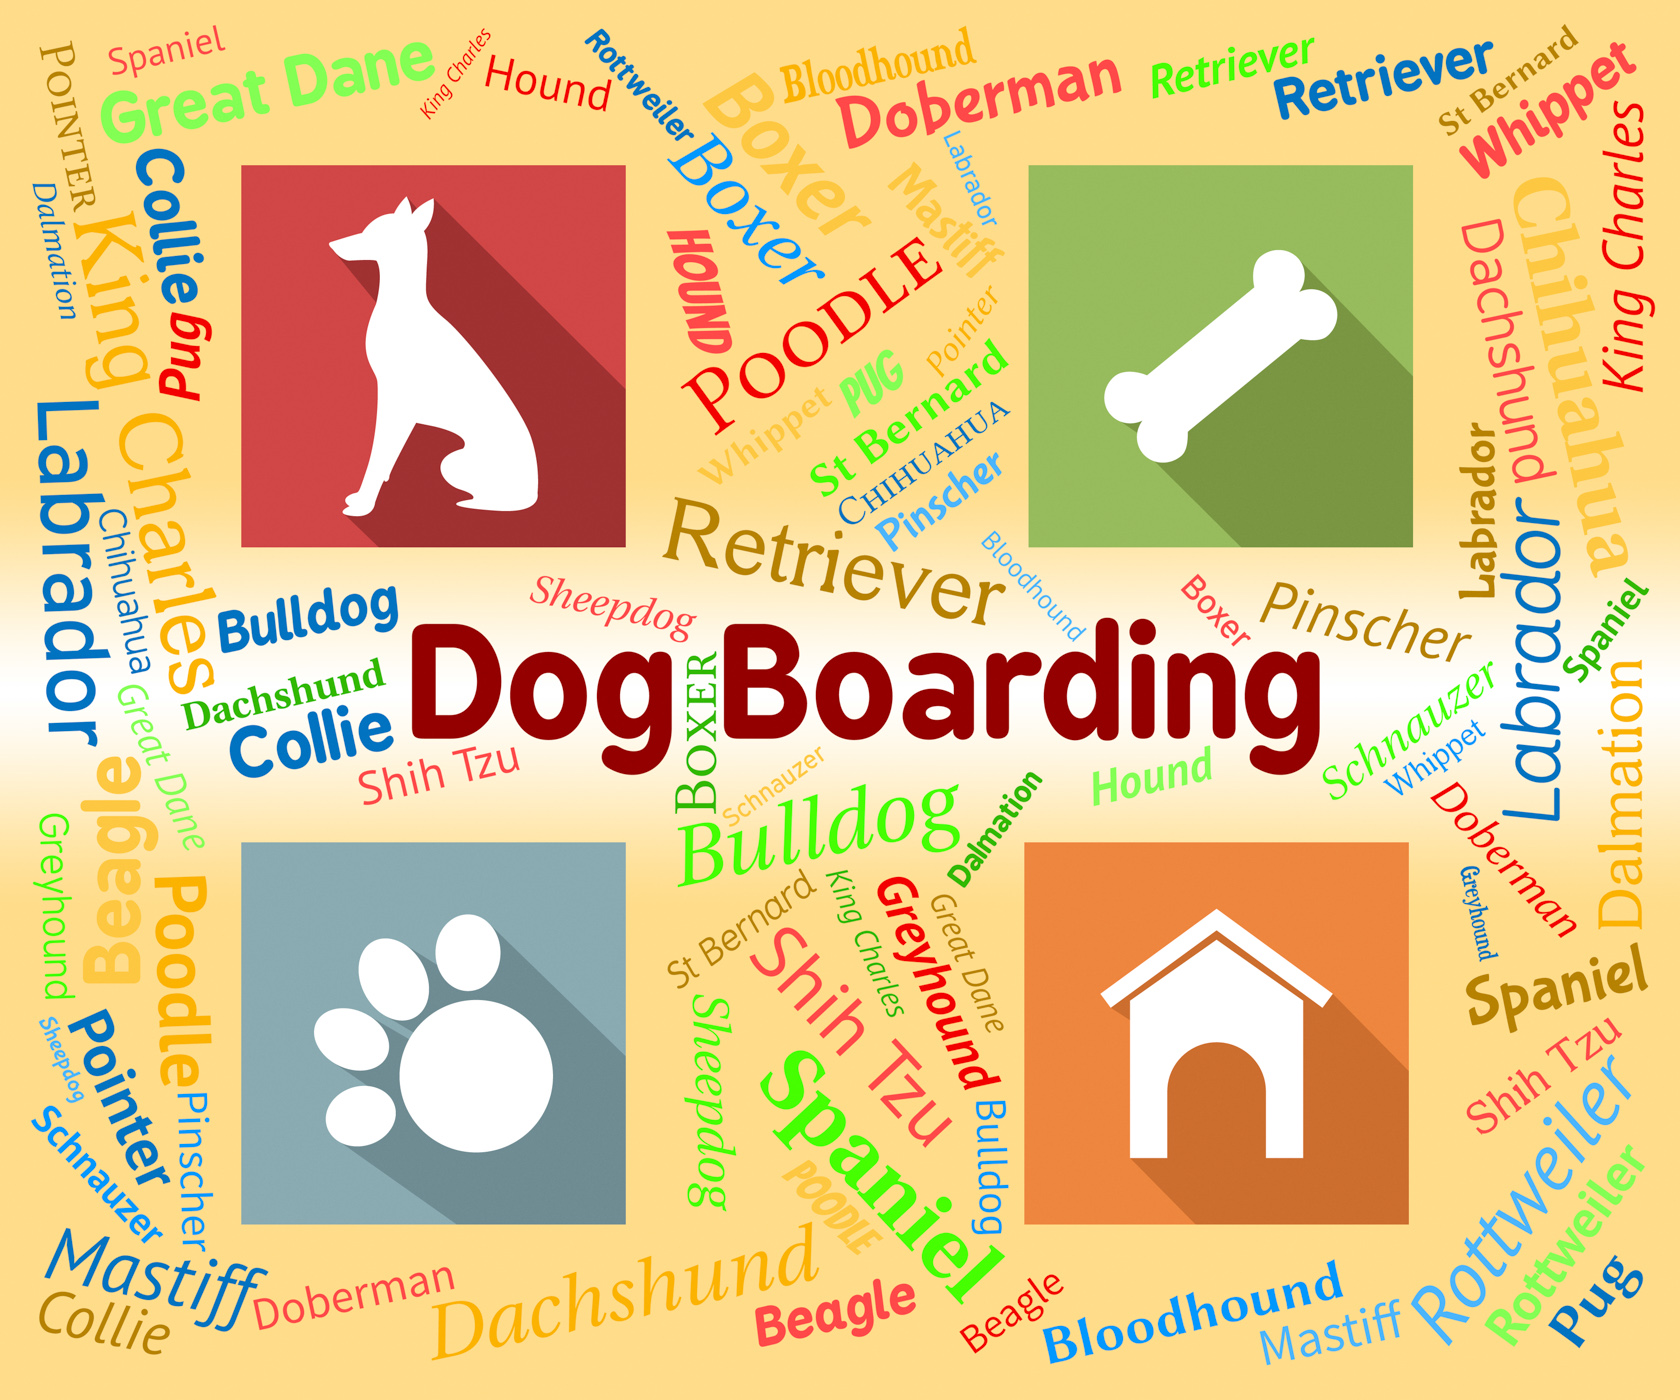 Boarding meaning. Dog on Board.